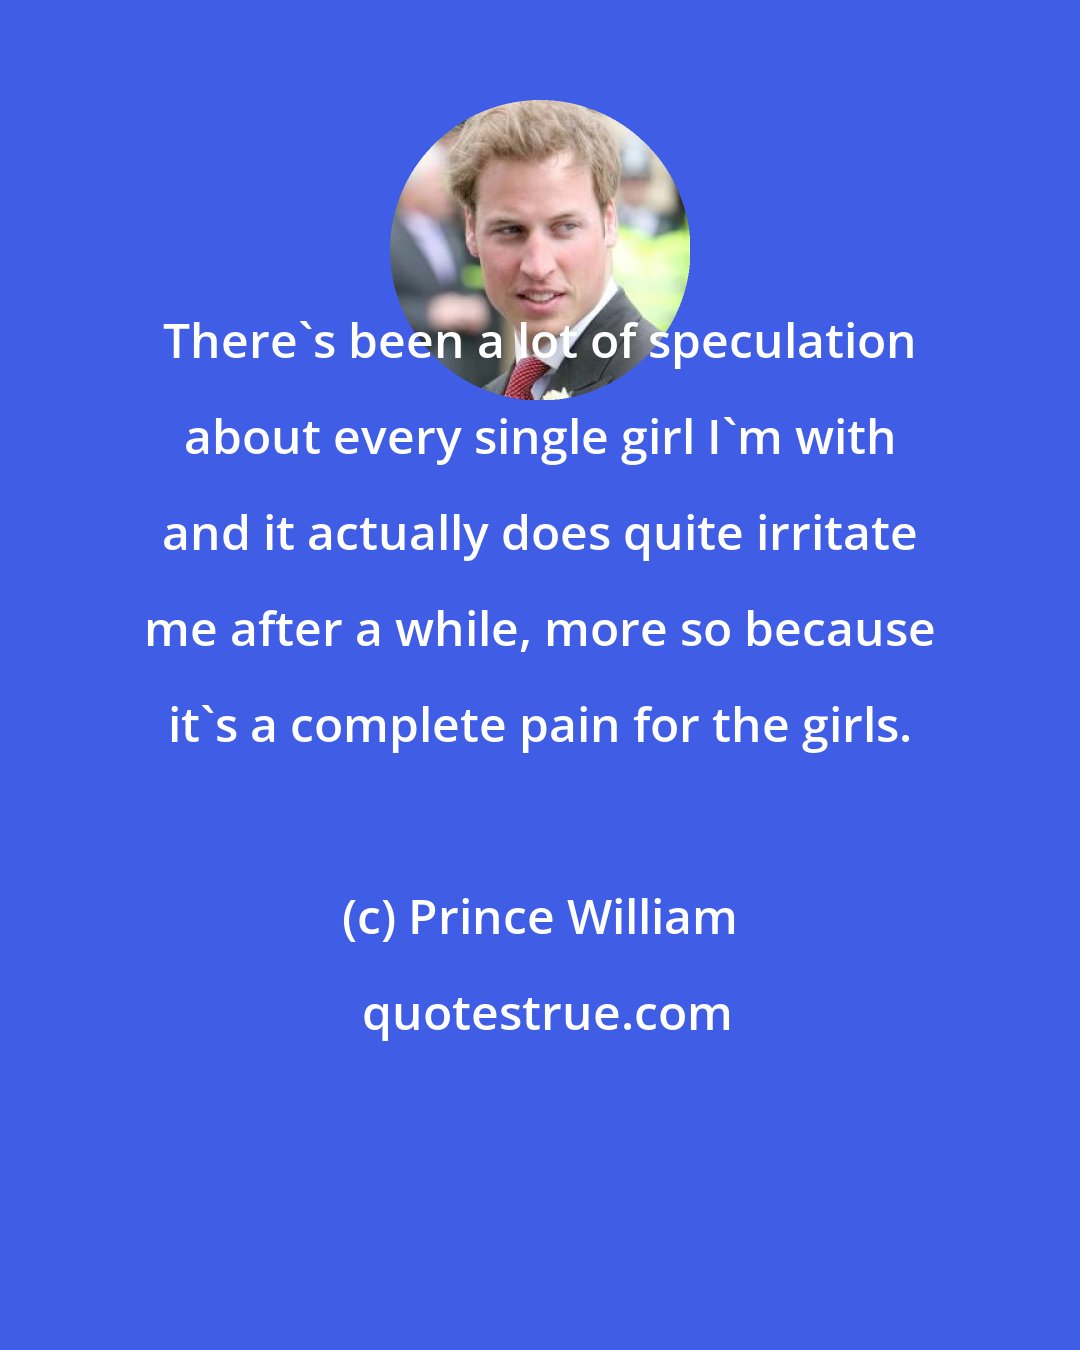 Prince William: There's been a lot of speculation about every single girl I'm with and it actually does quite irritate me after a while, more so because it's a complete pain for the girls.